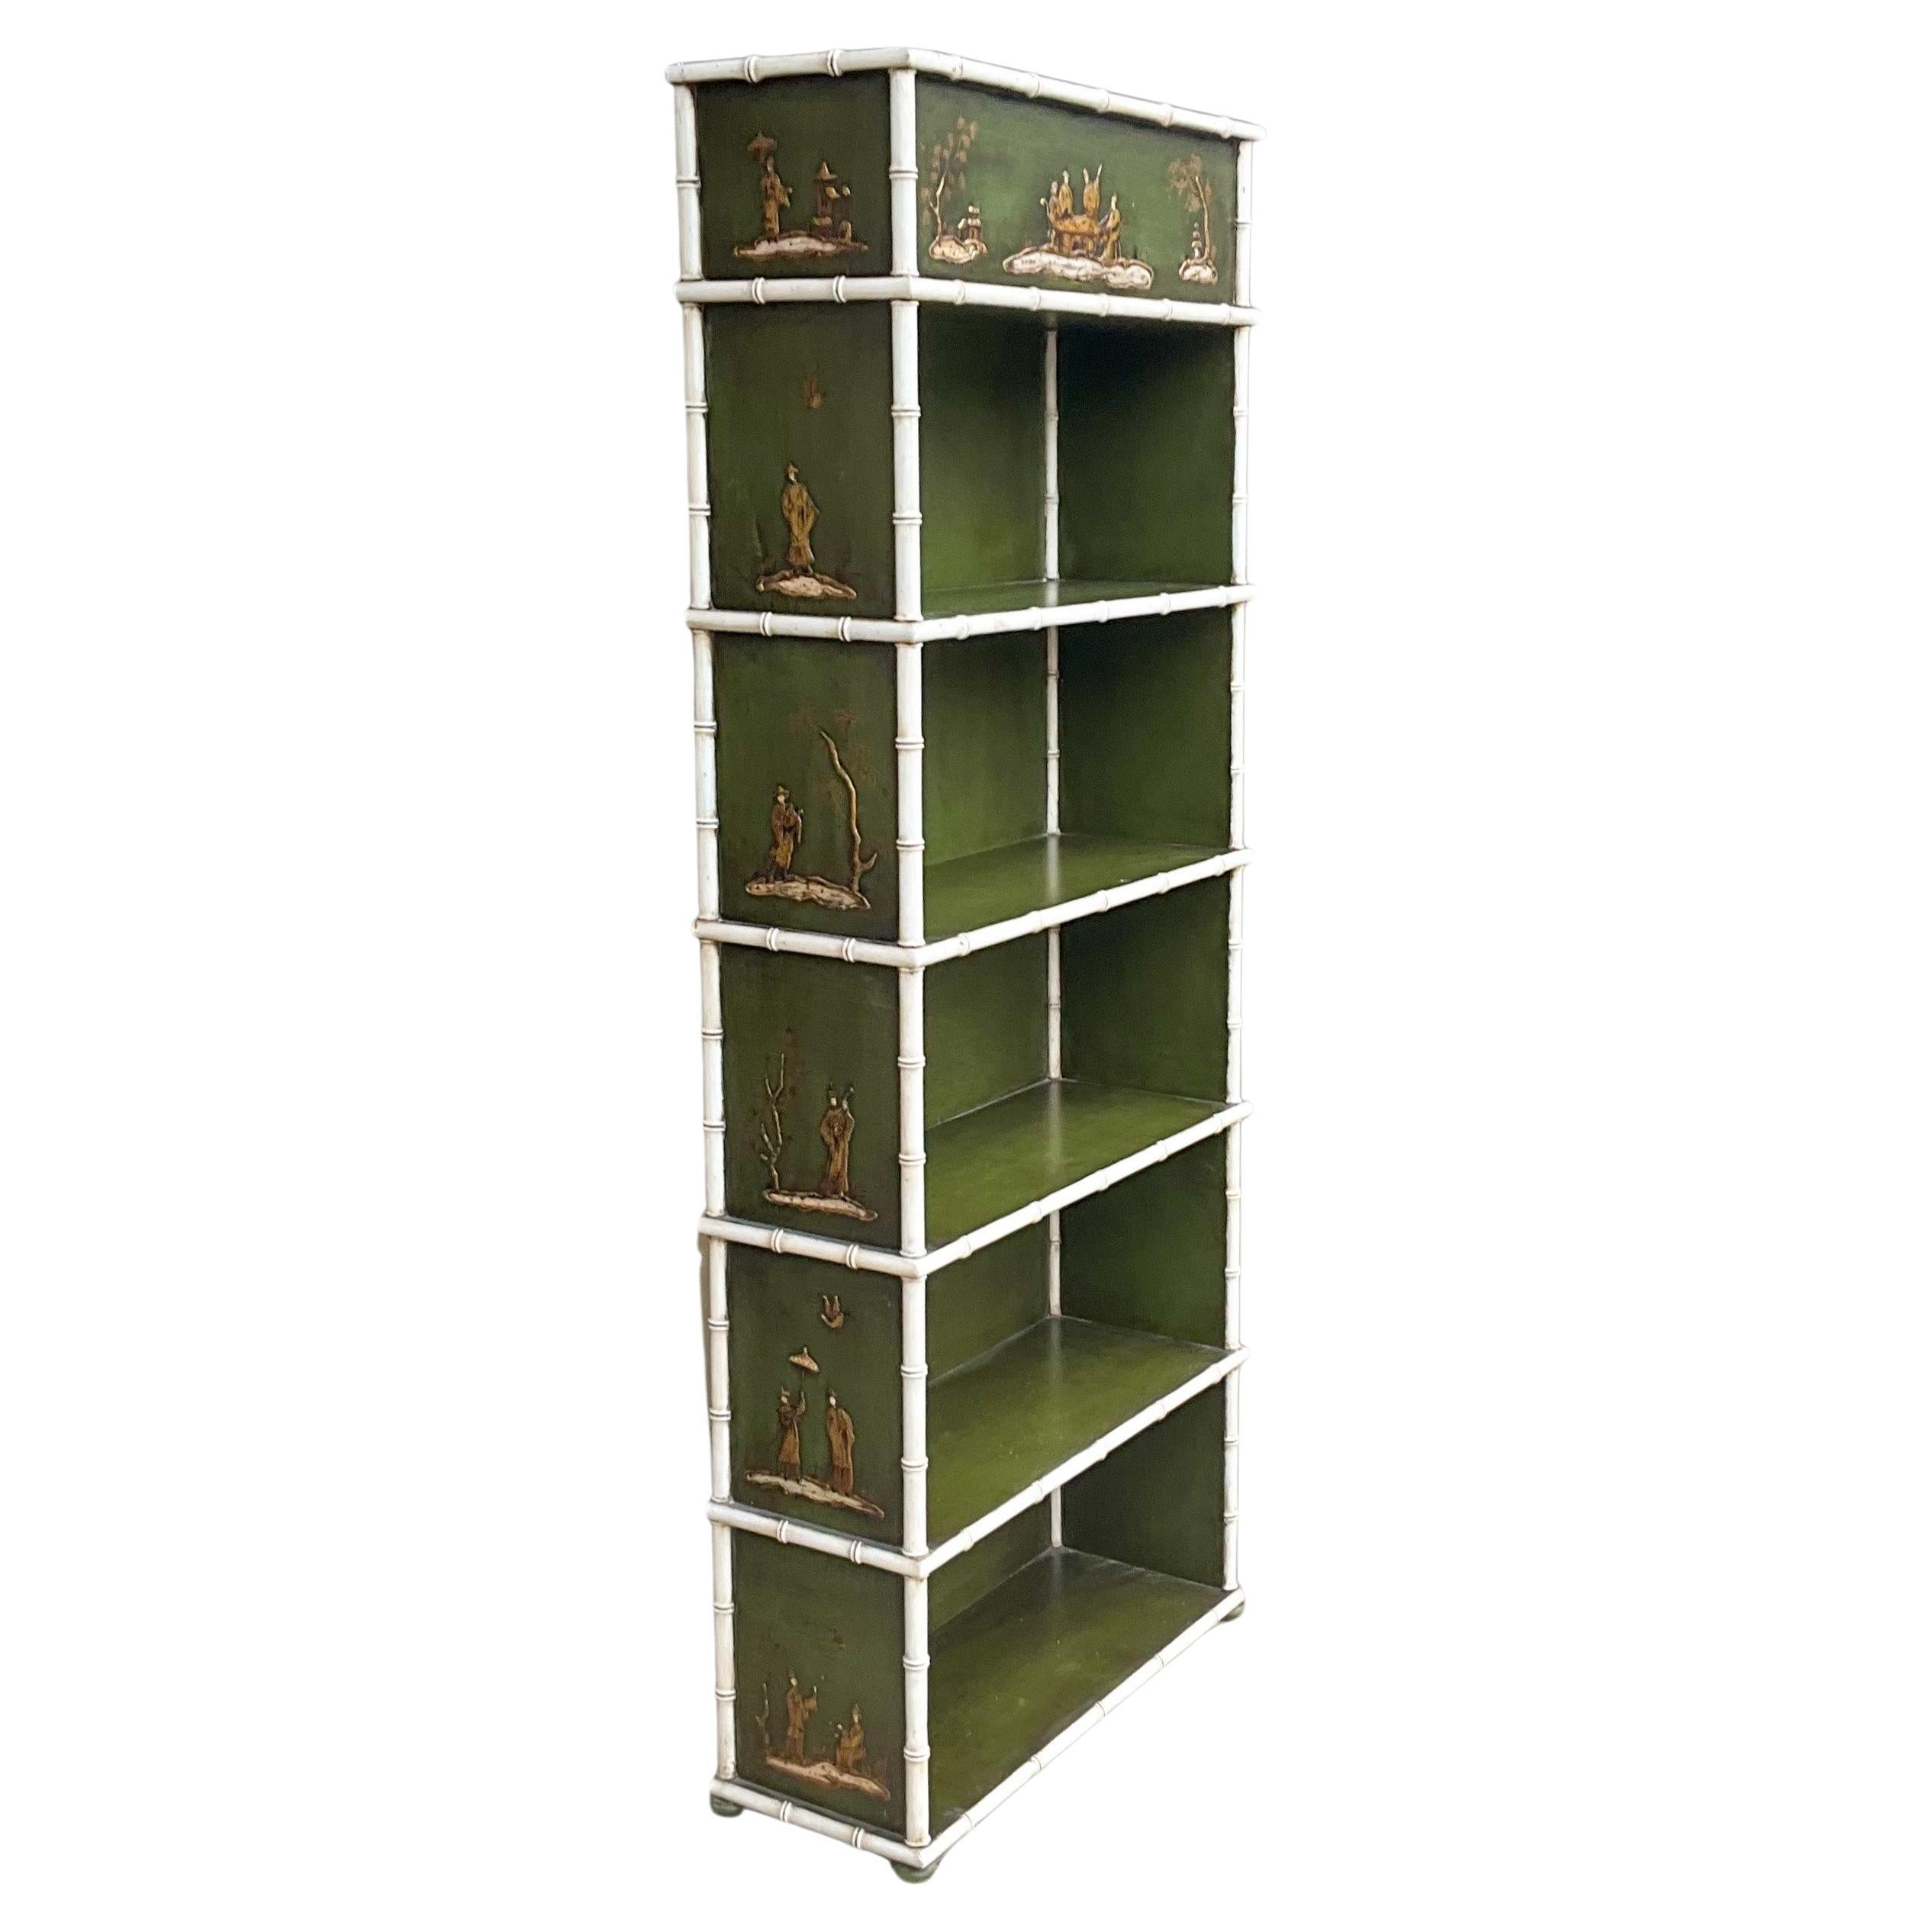 This is a late 20th century regency style chinoiserie and faux bamboo bookcase manufactured in Spain. It has a distressed white faux bamboo frame, and the body is a distressed green with hand painted gilt chinoiserie pastoral scenes. It is unmarked